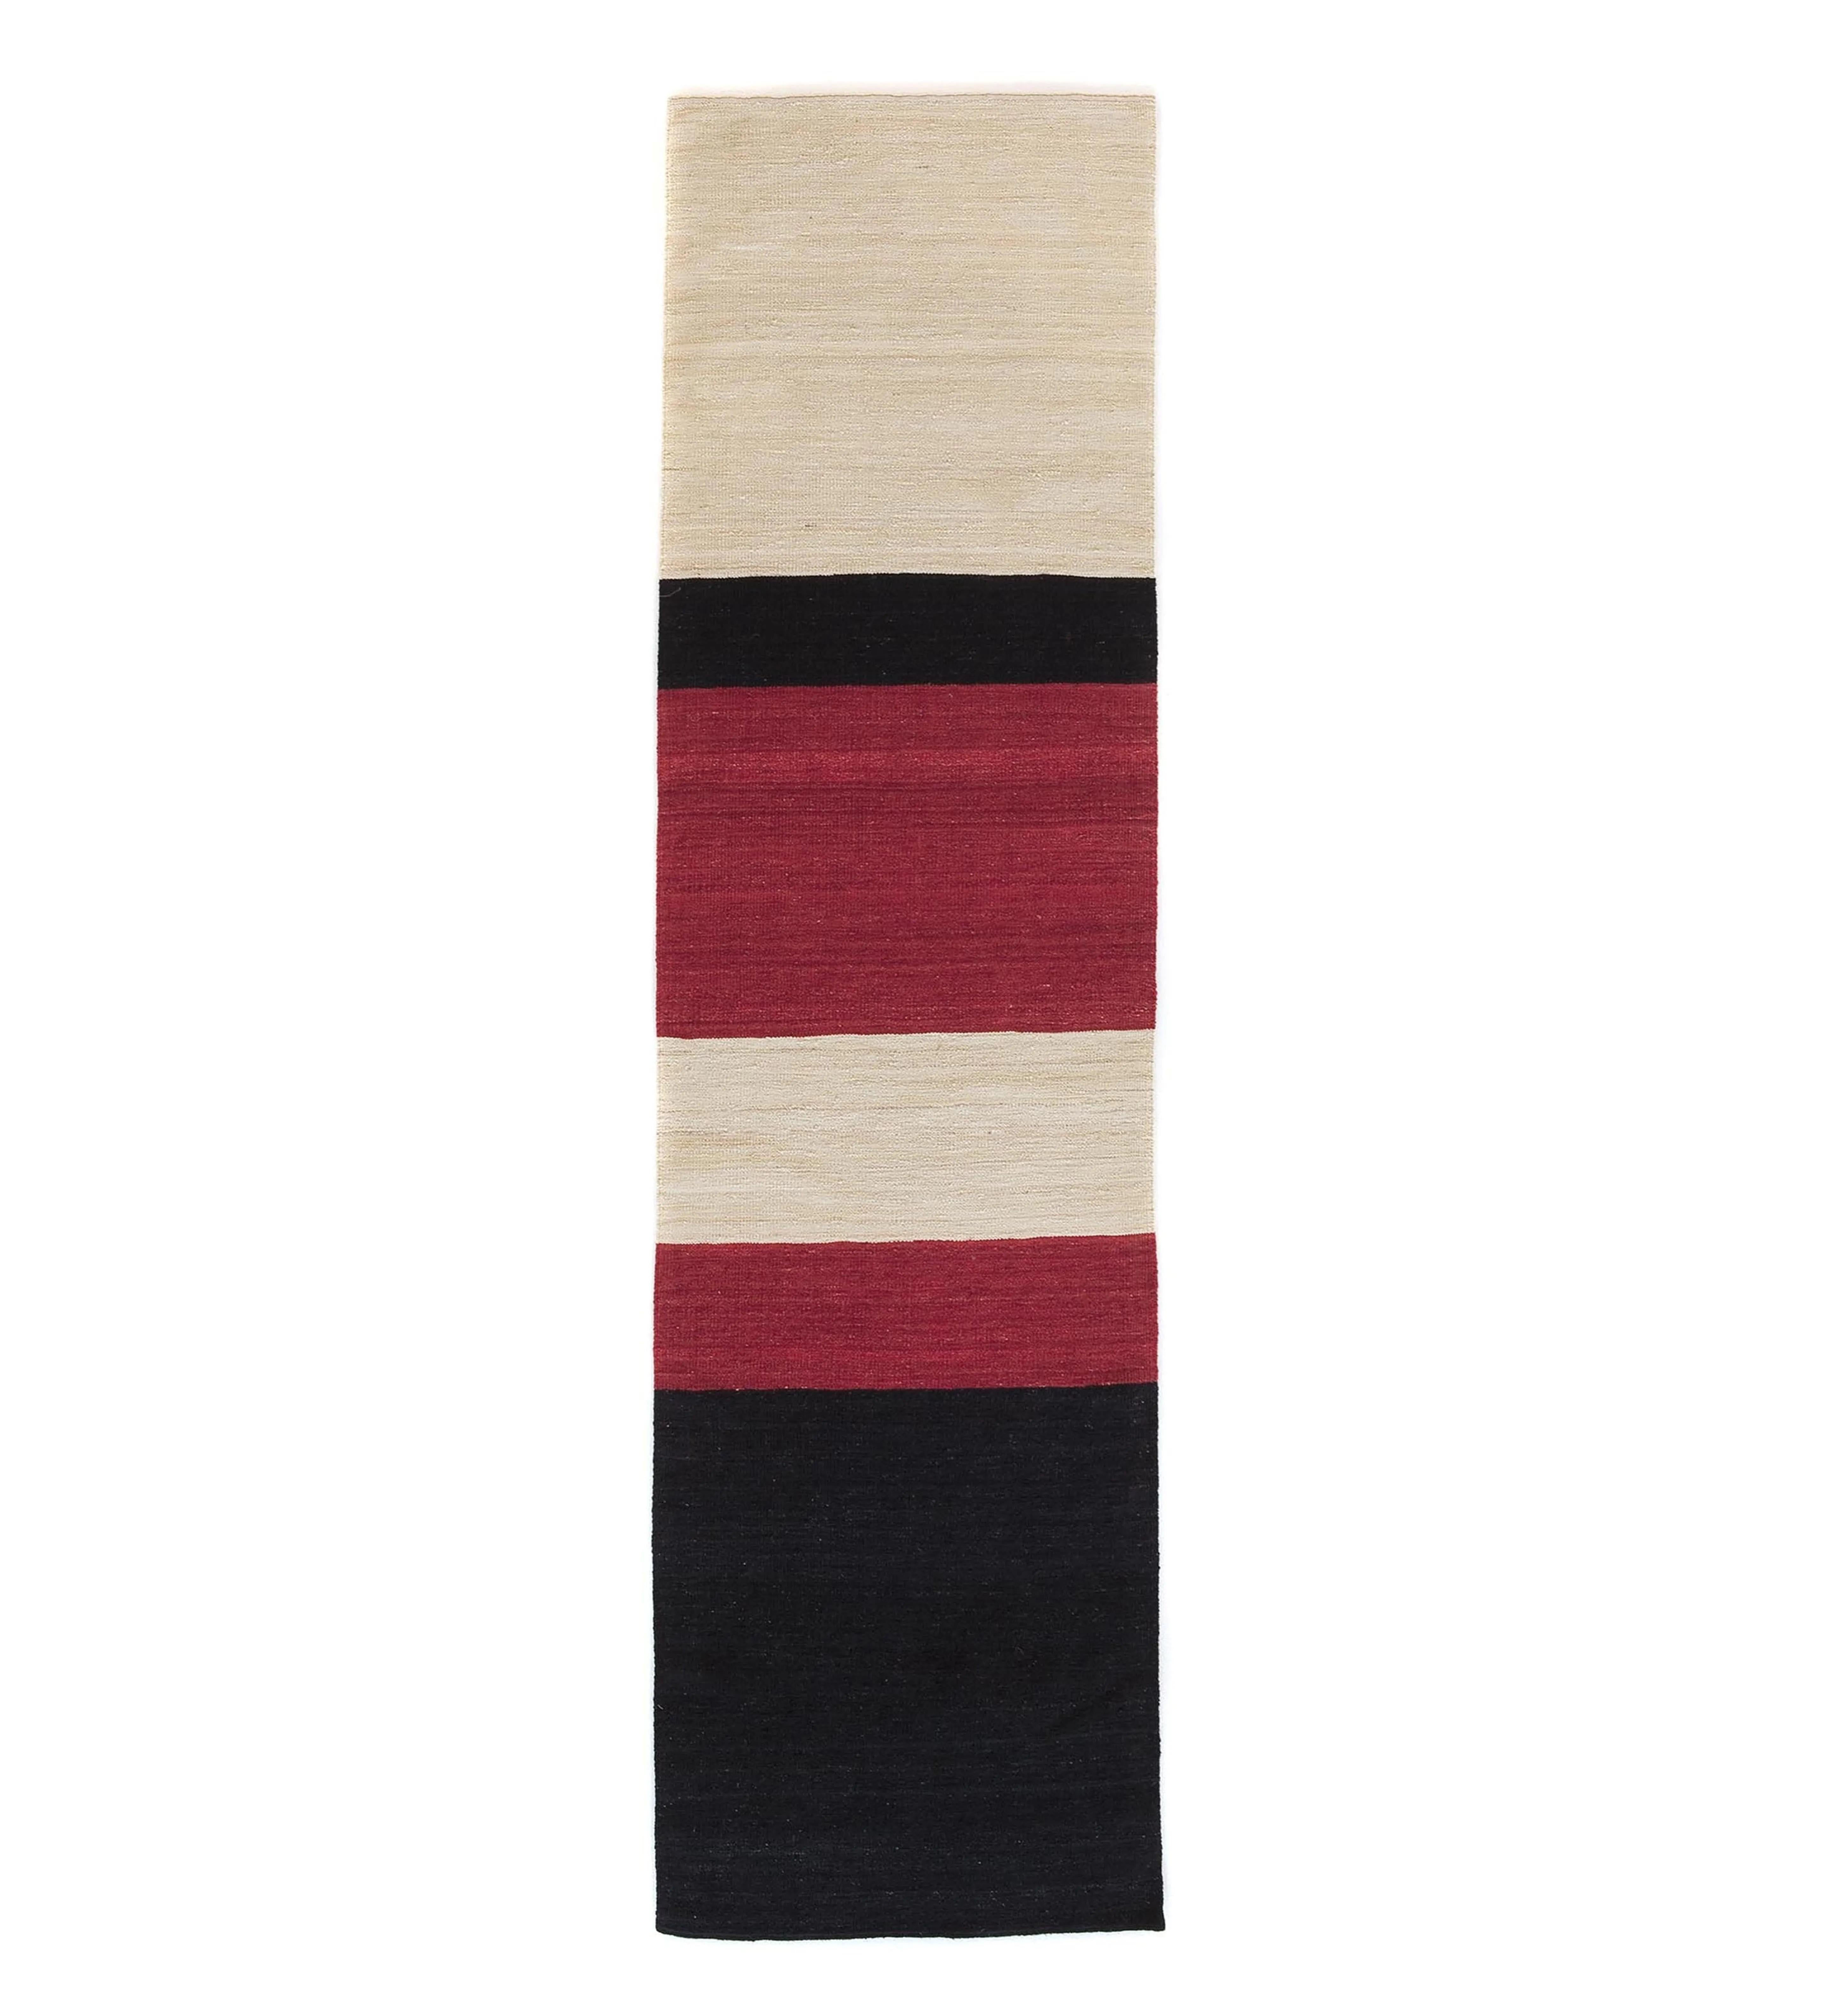 'Mélange Color 2' Hand-Loomed Rug by Sybilla for Nanimarquina For Sale 2